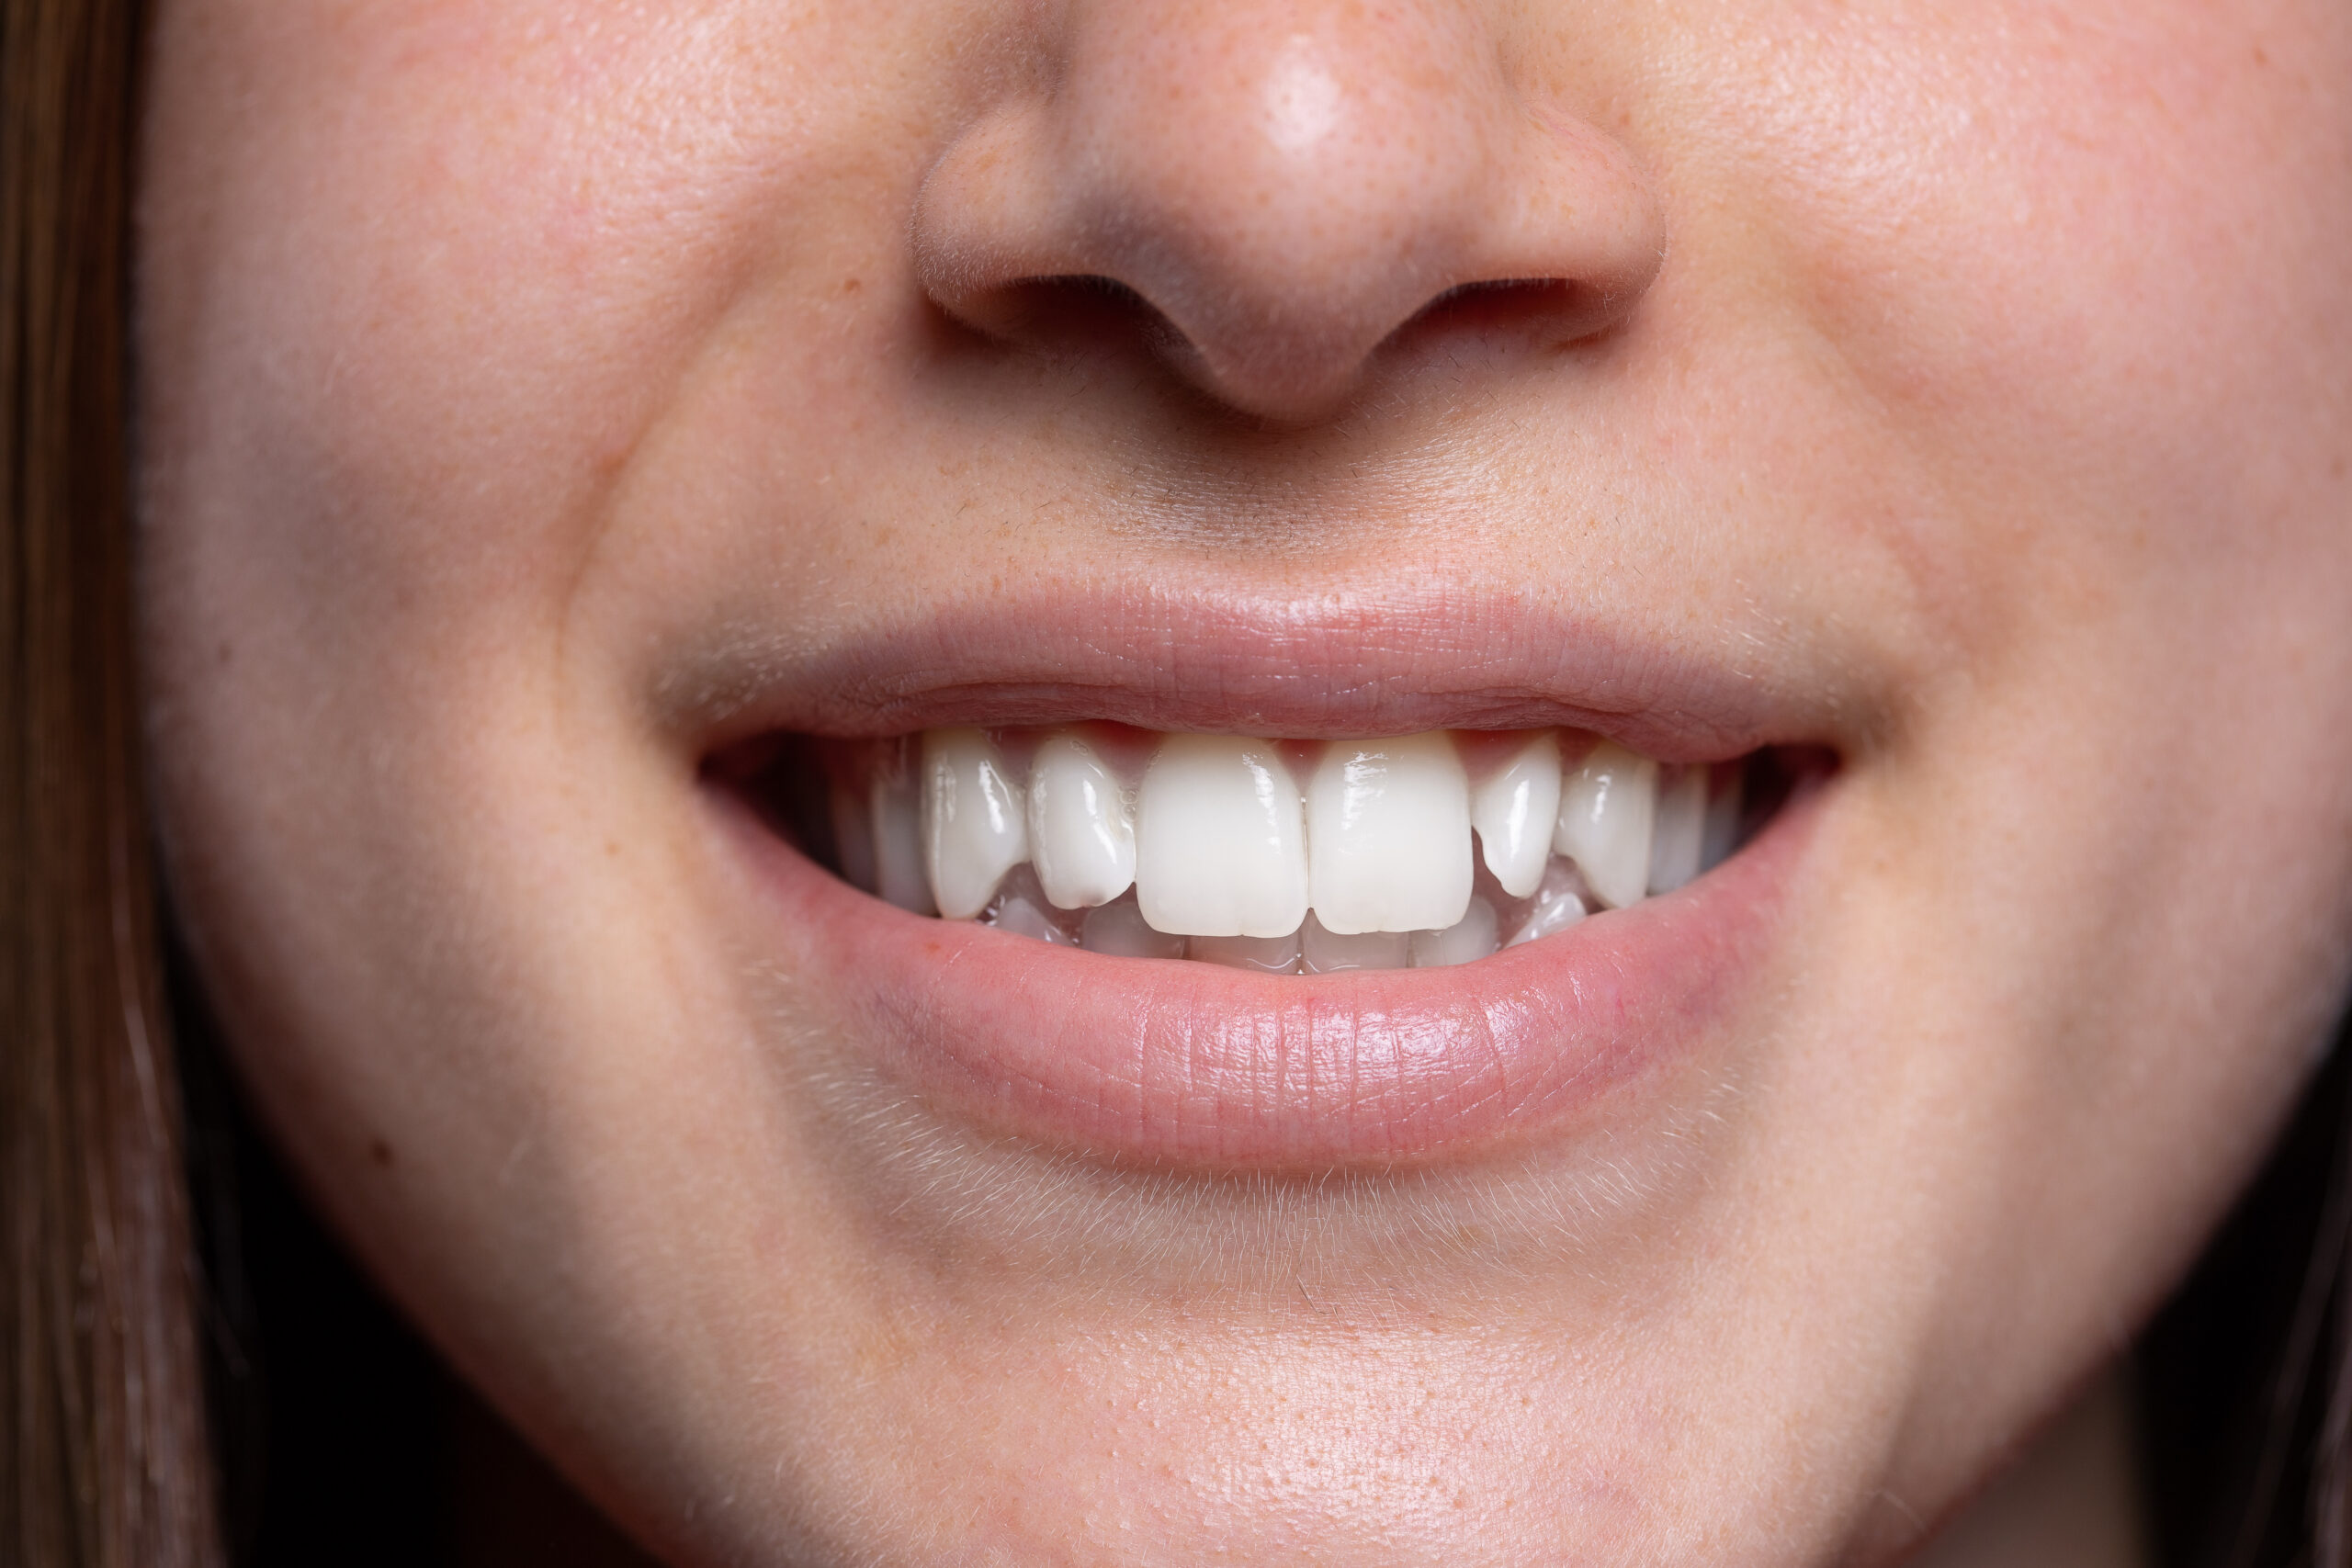 A close-up view in the mouth of a young Caucasian lady. Smiling